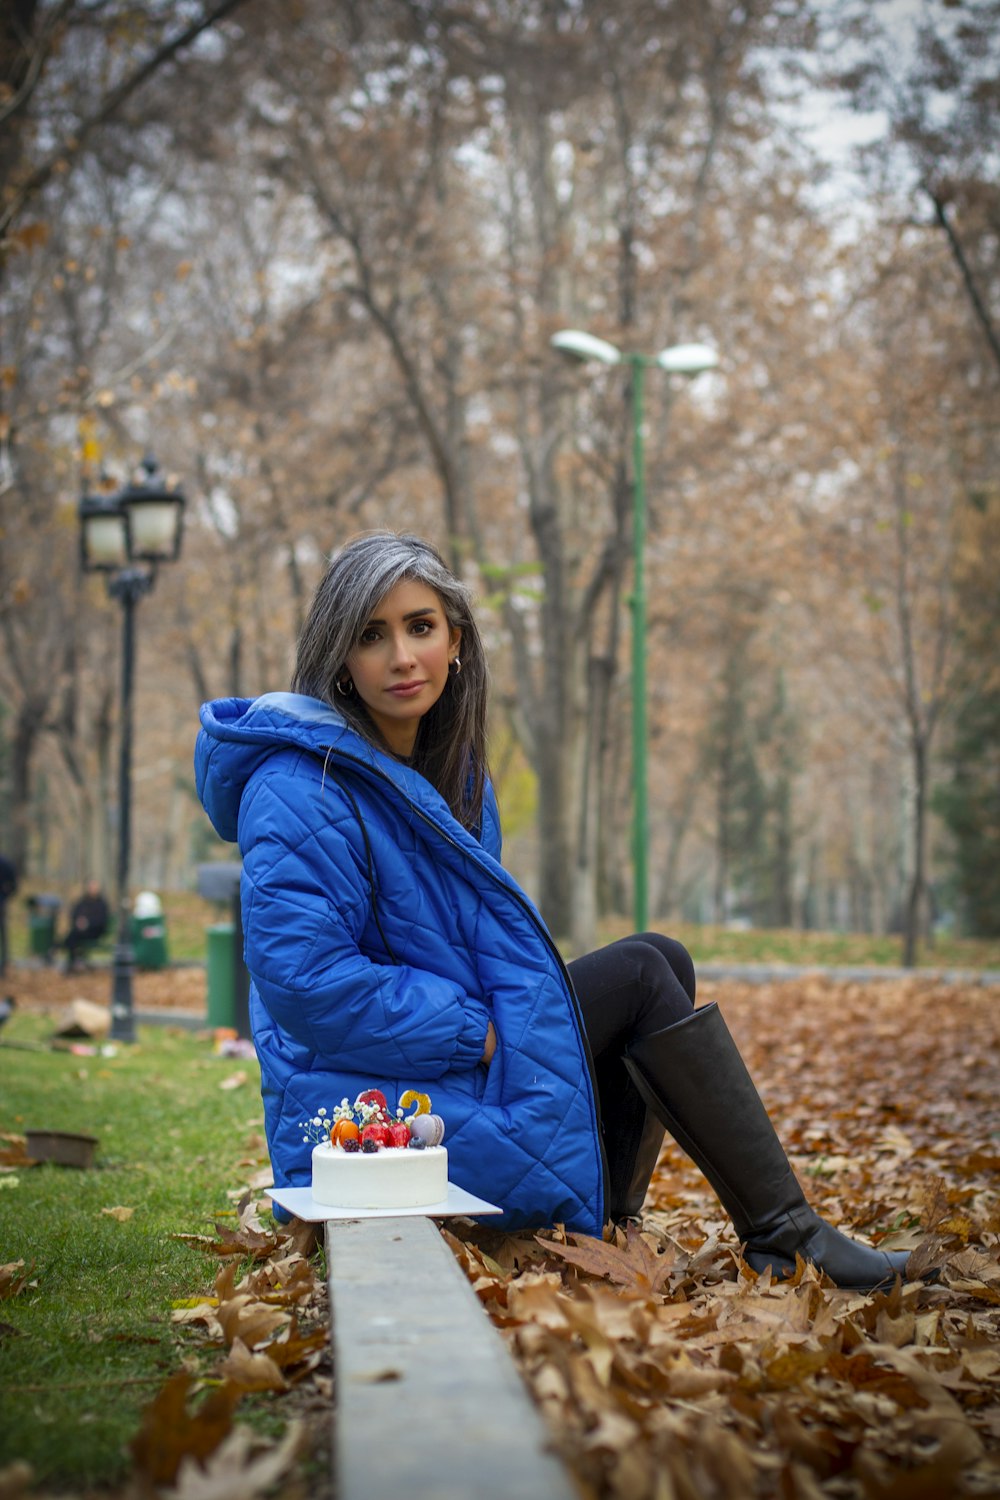 a woman sitting on the ground with a cake